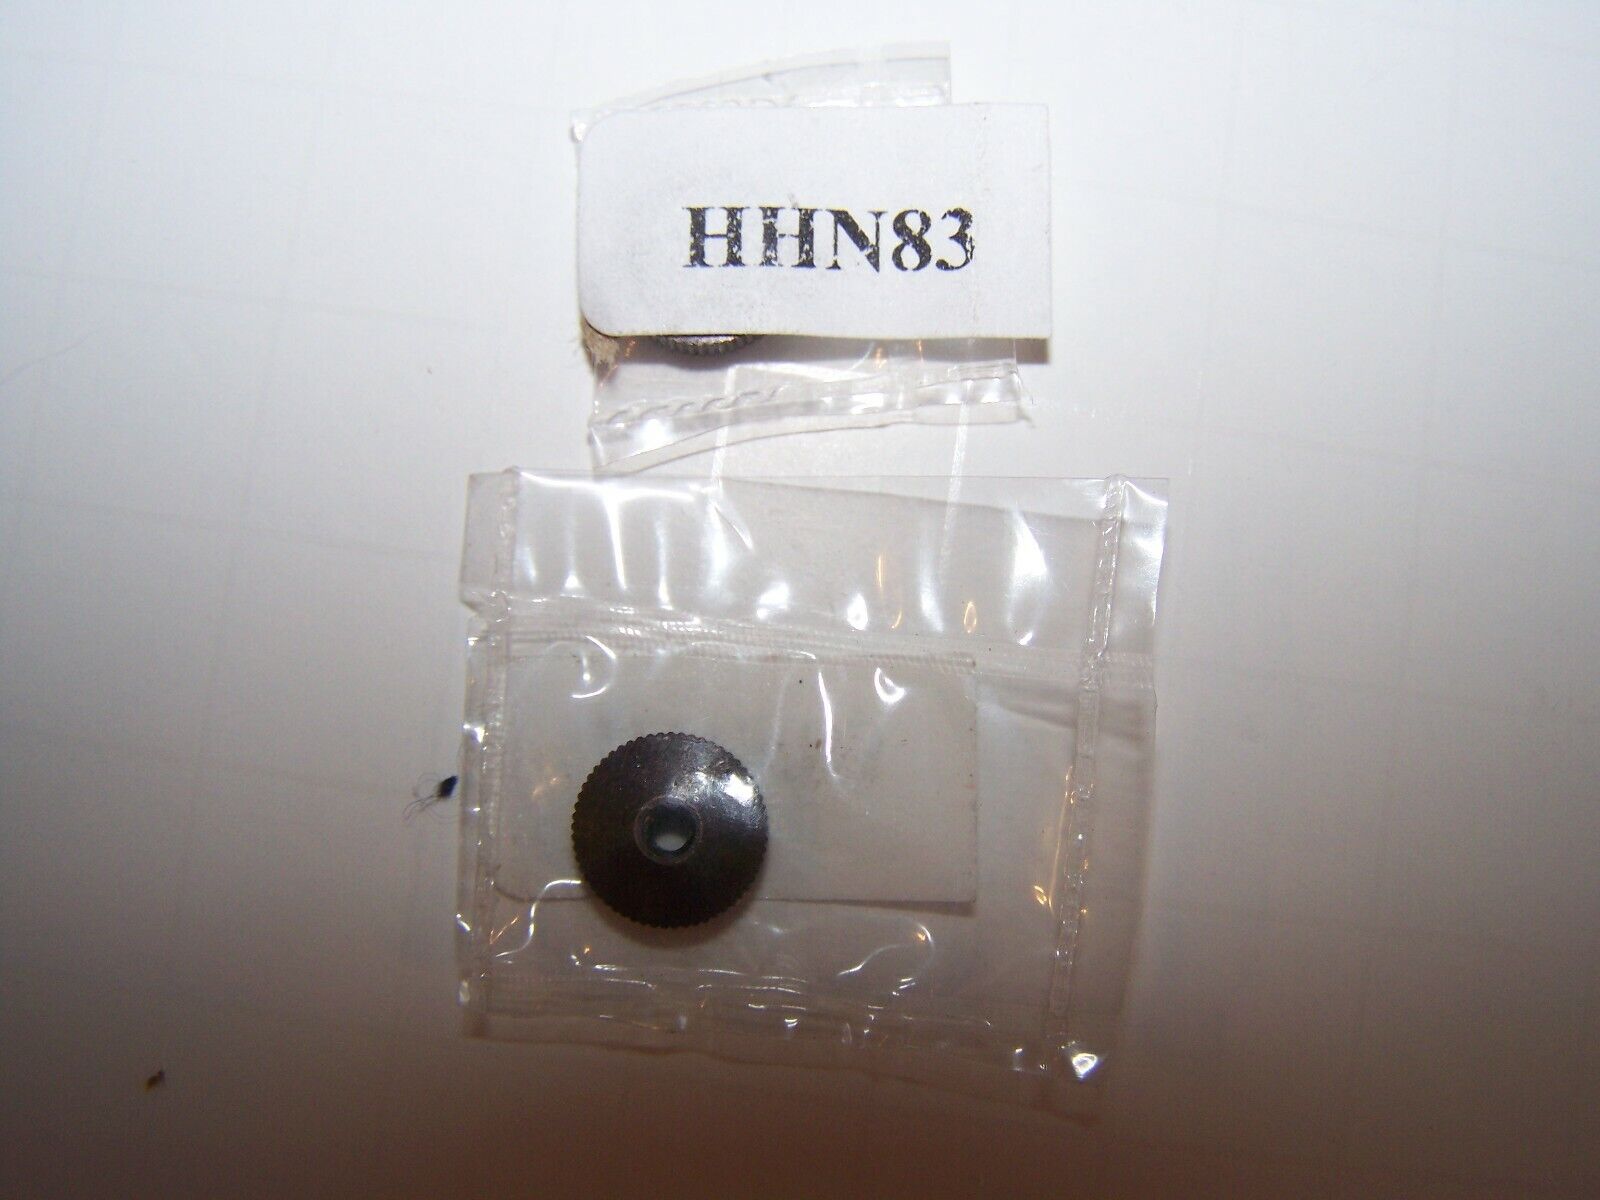 Hermle center shaft hand nut large for 471 & 1171 movements #HHN83 10.0 x M2.5